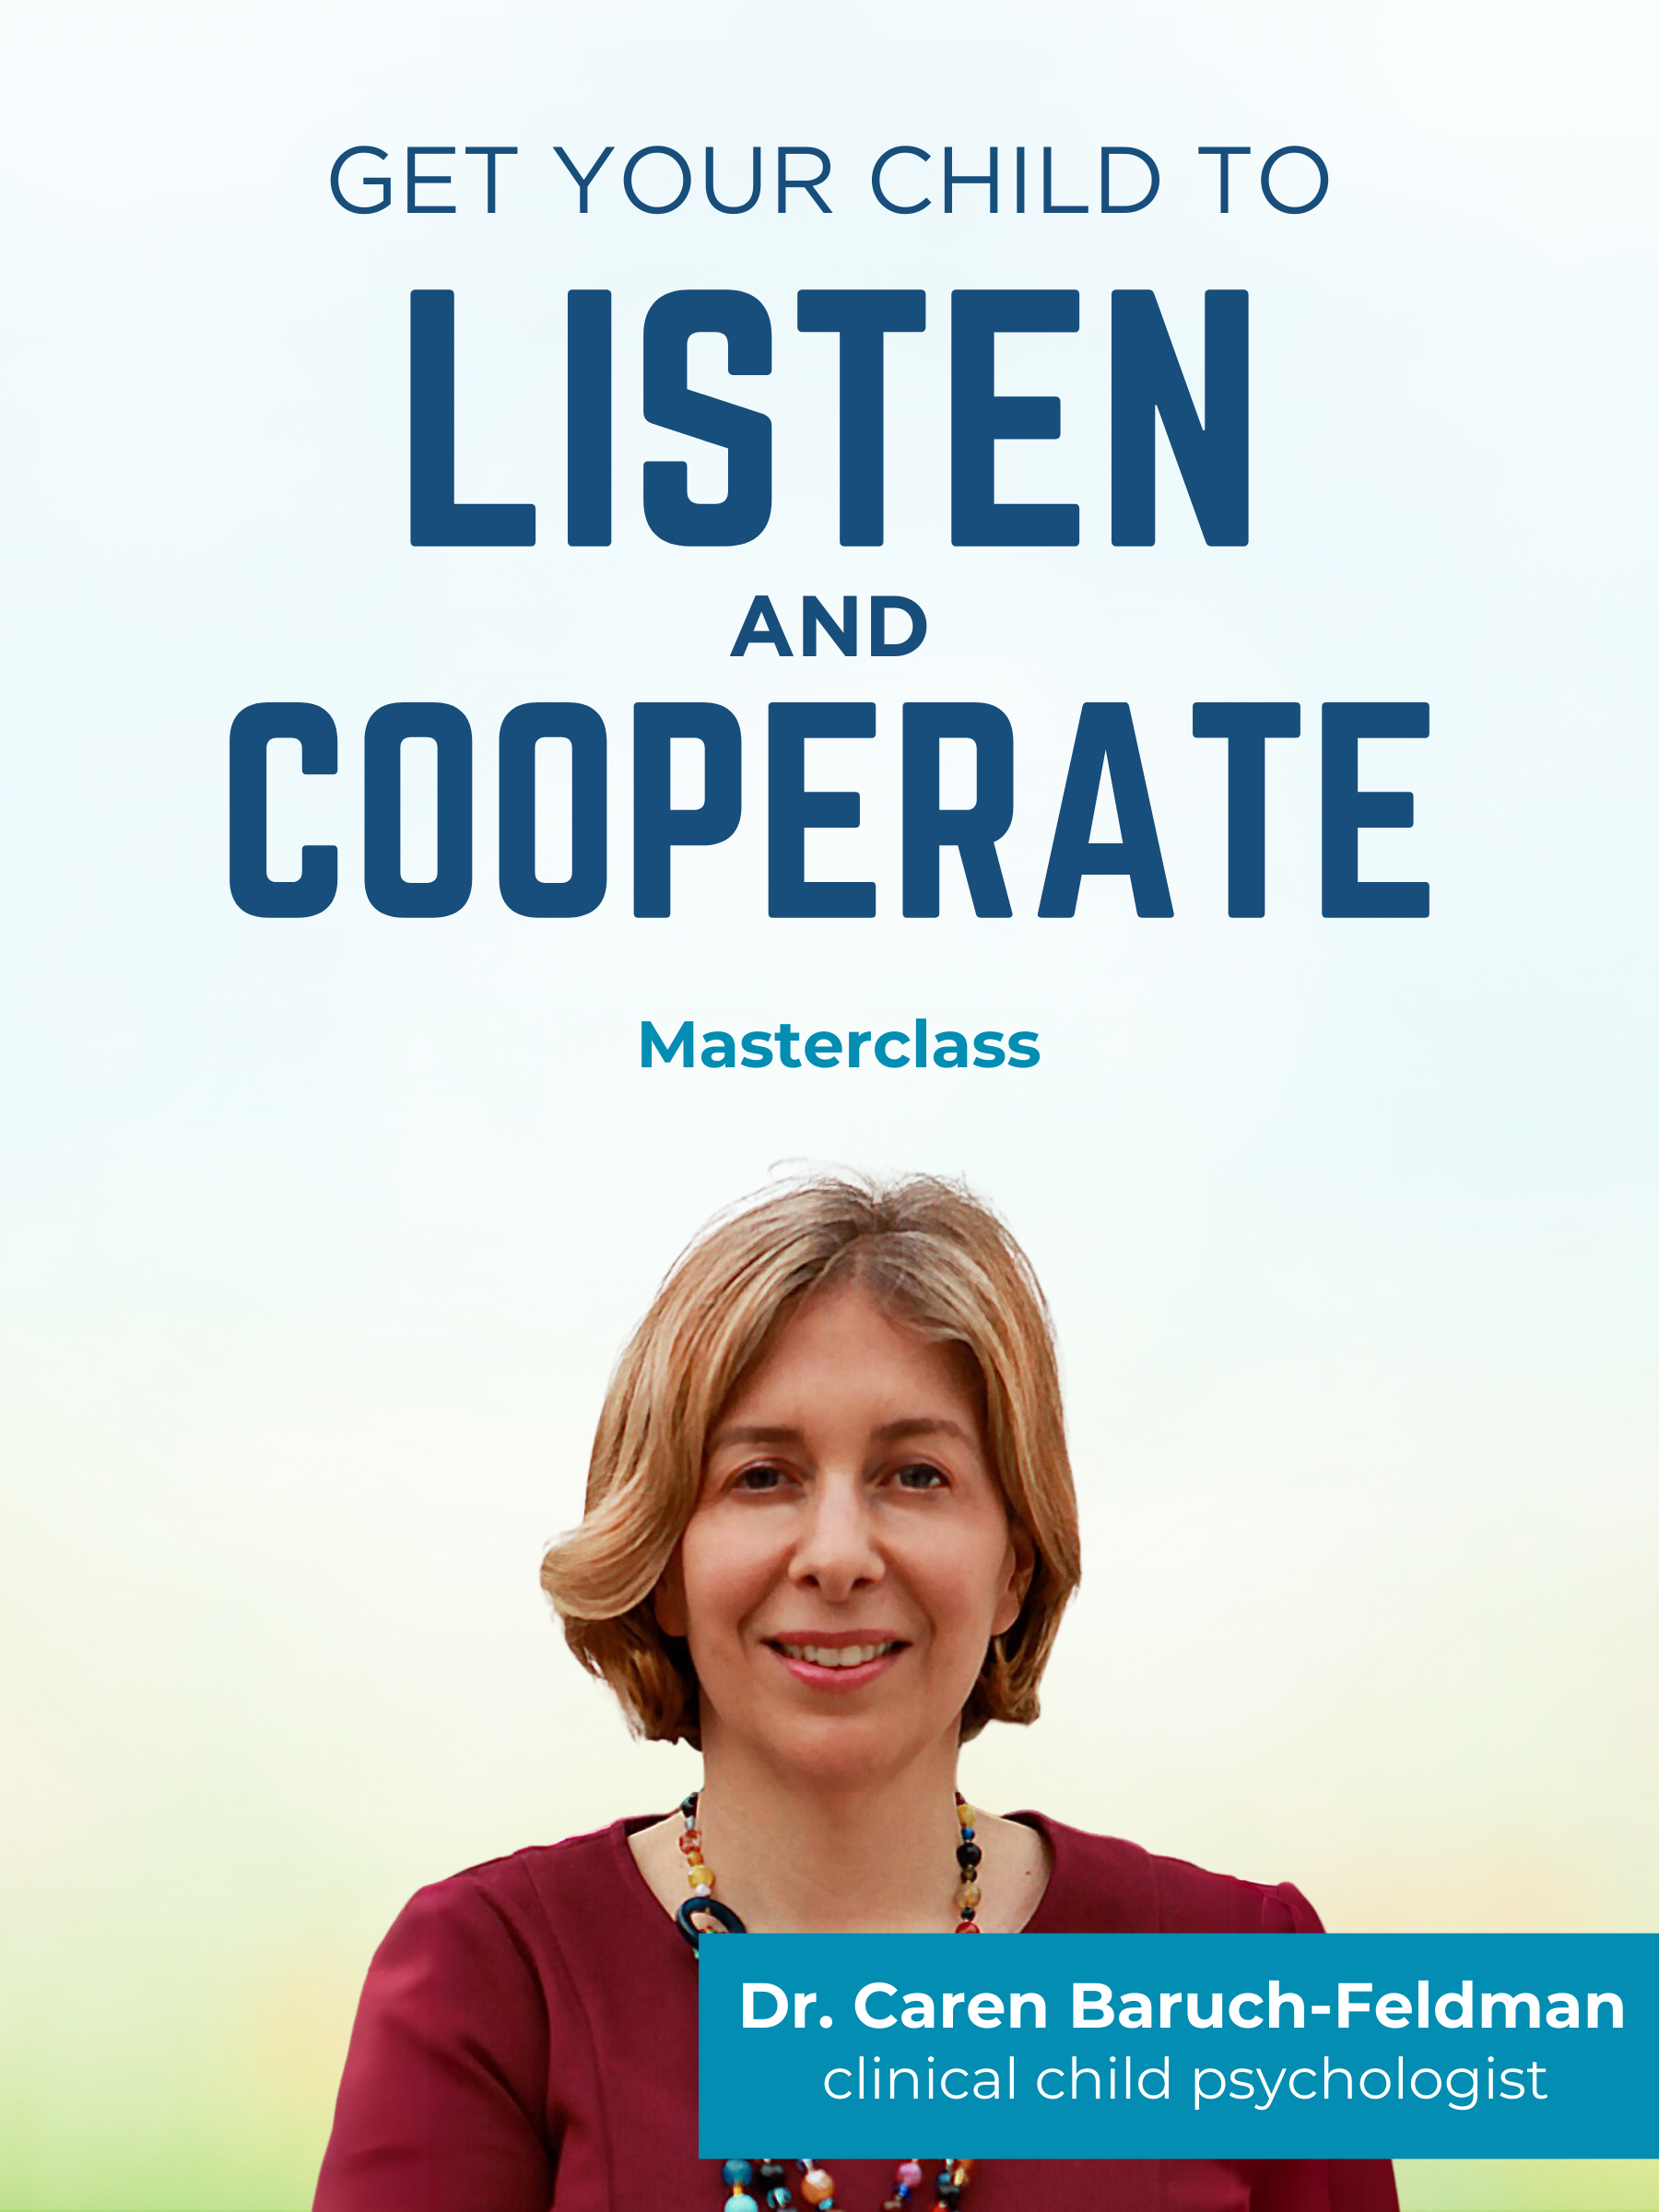 Masterclass: Get Your Child to Listen and Cooperate